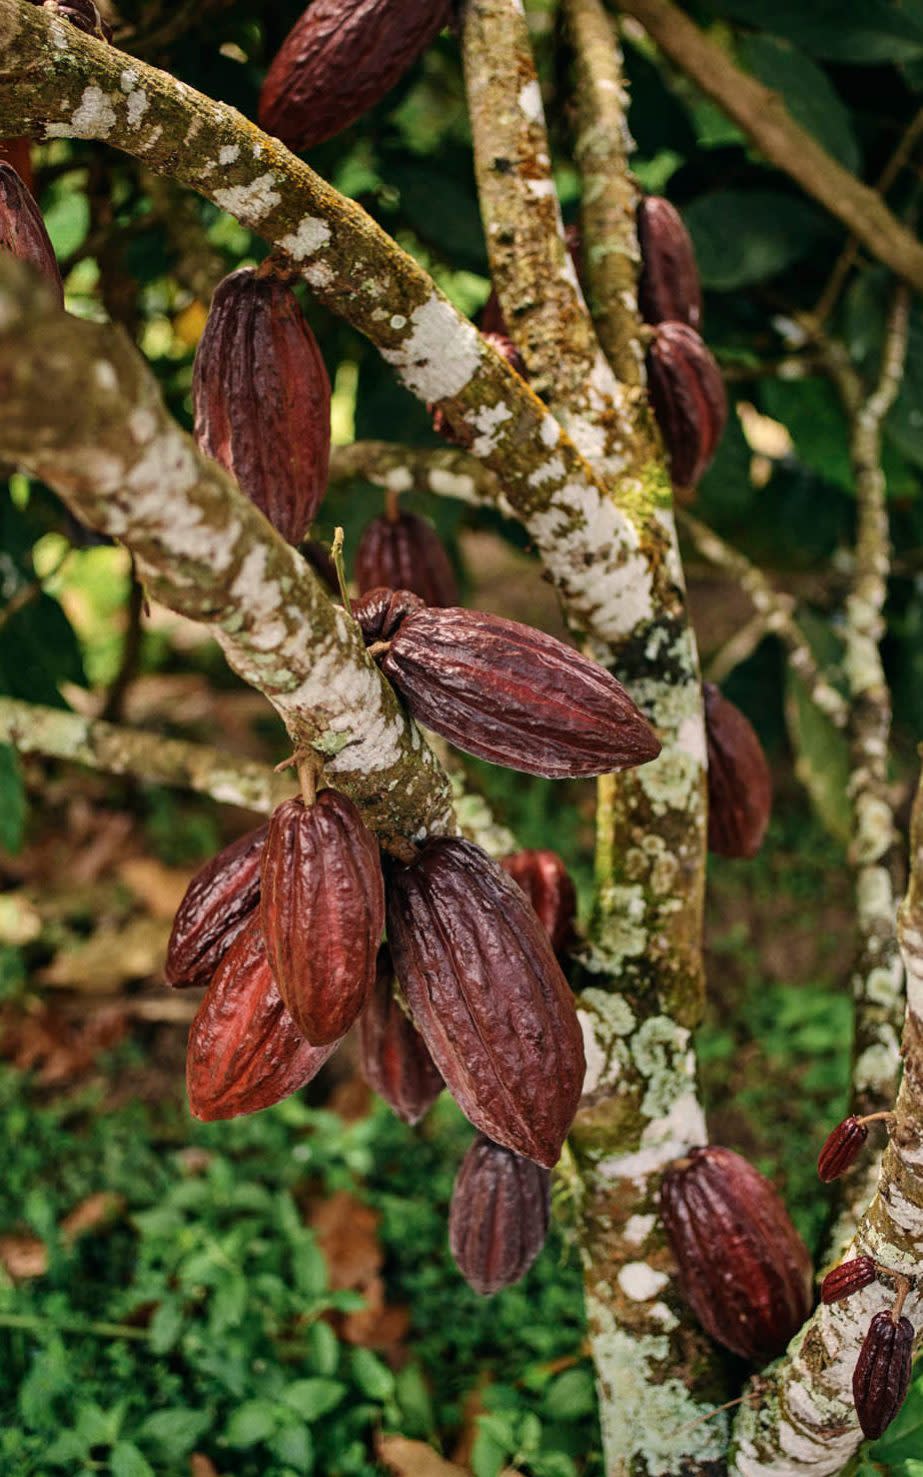 Cocoa pods grow straight from the trunk and branches of the tree   - Credit: Ben Quinton